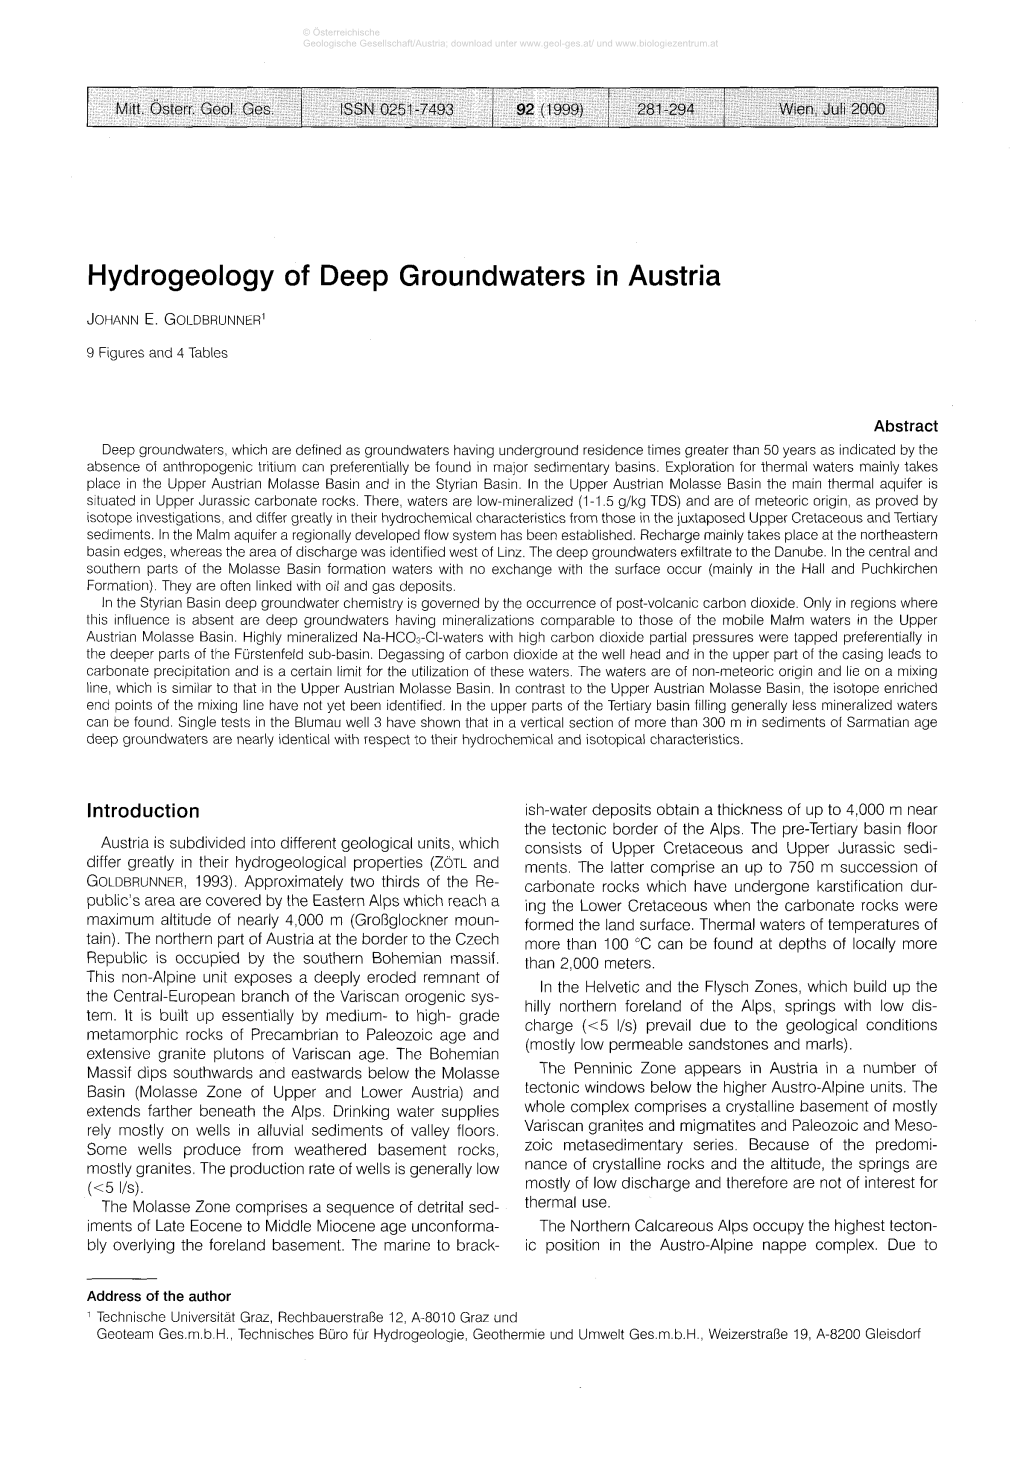 Hydrogeology of Deep Groundwaters in Austria